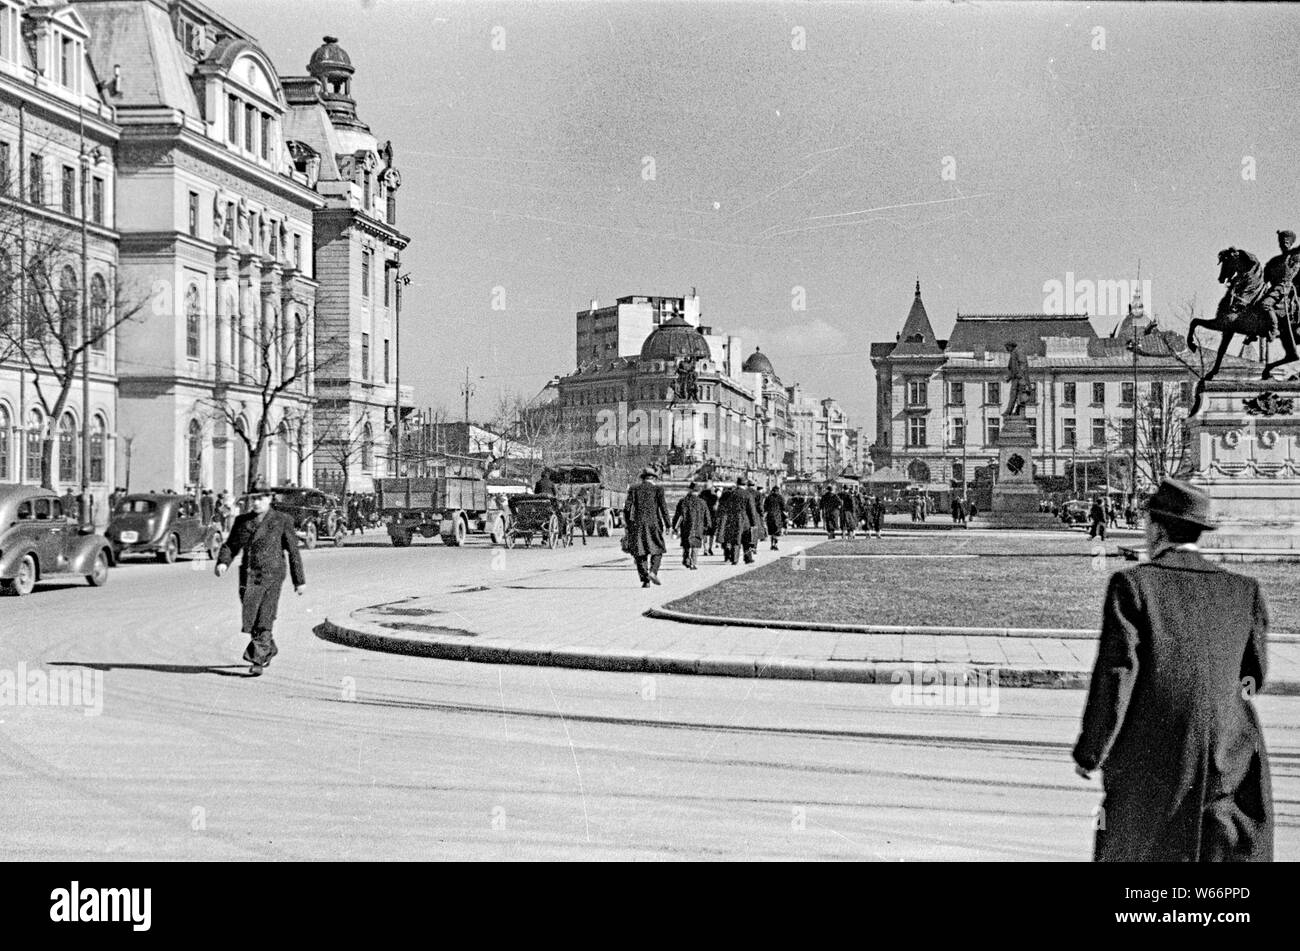 City scape of Bukarest, Romania in 1942 during world war 2 Stock Photo